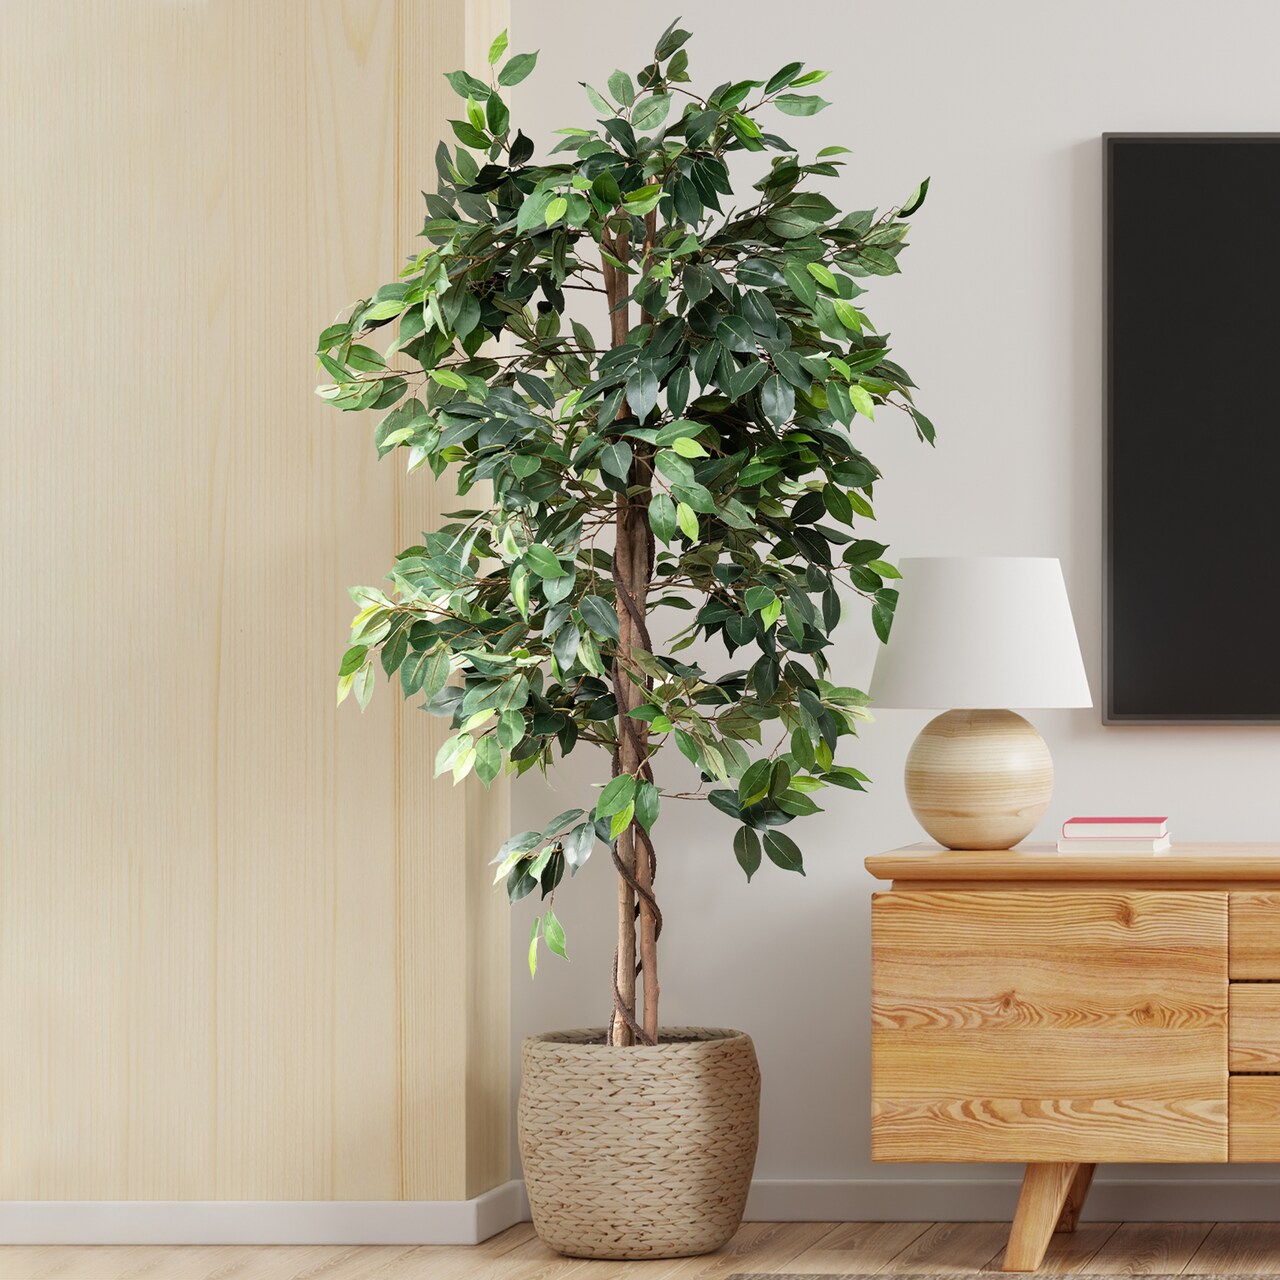 Artificial Trees for Home Decor Indoor - Fake Plants & Faux Plants Indoor - Fake  Plants Tall Ficus